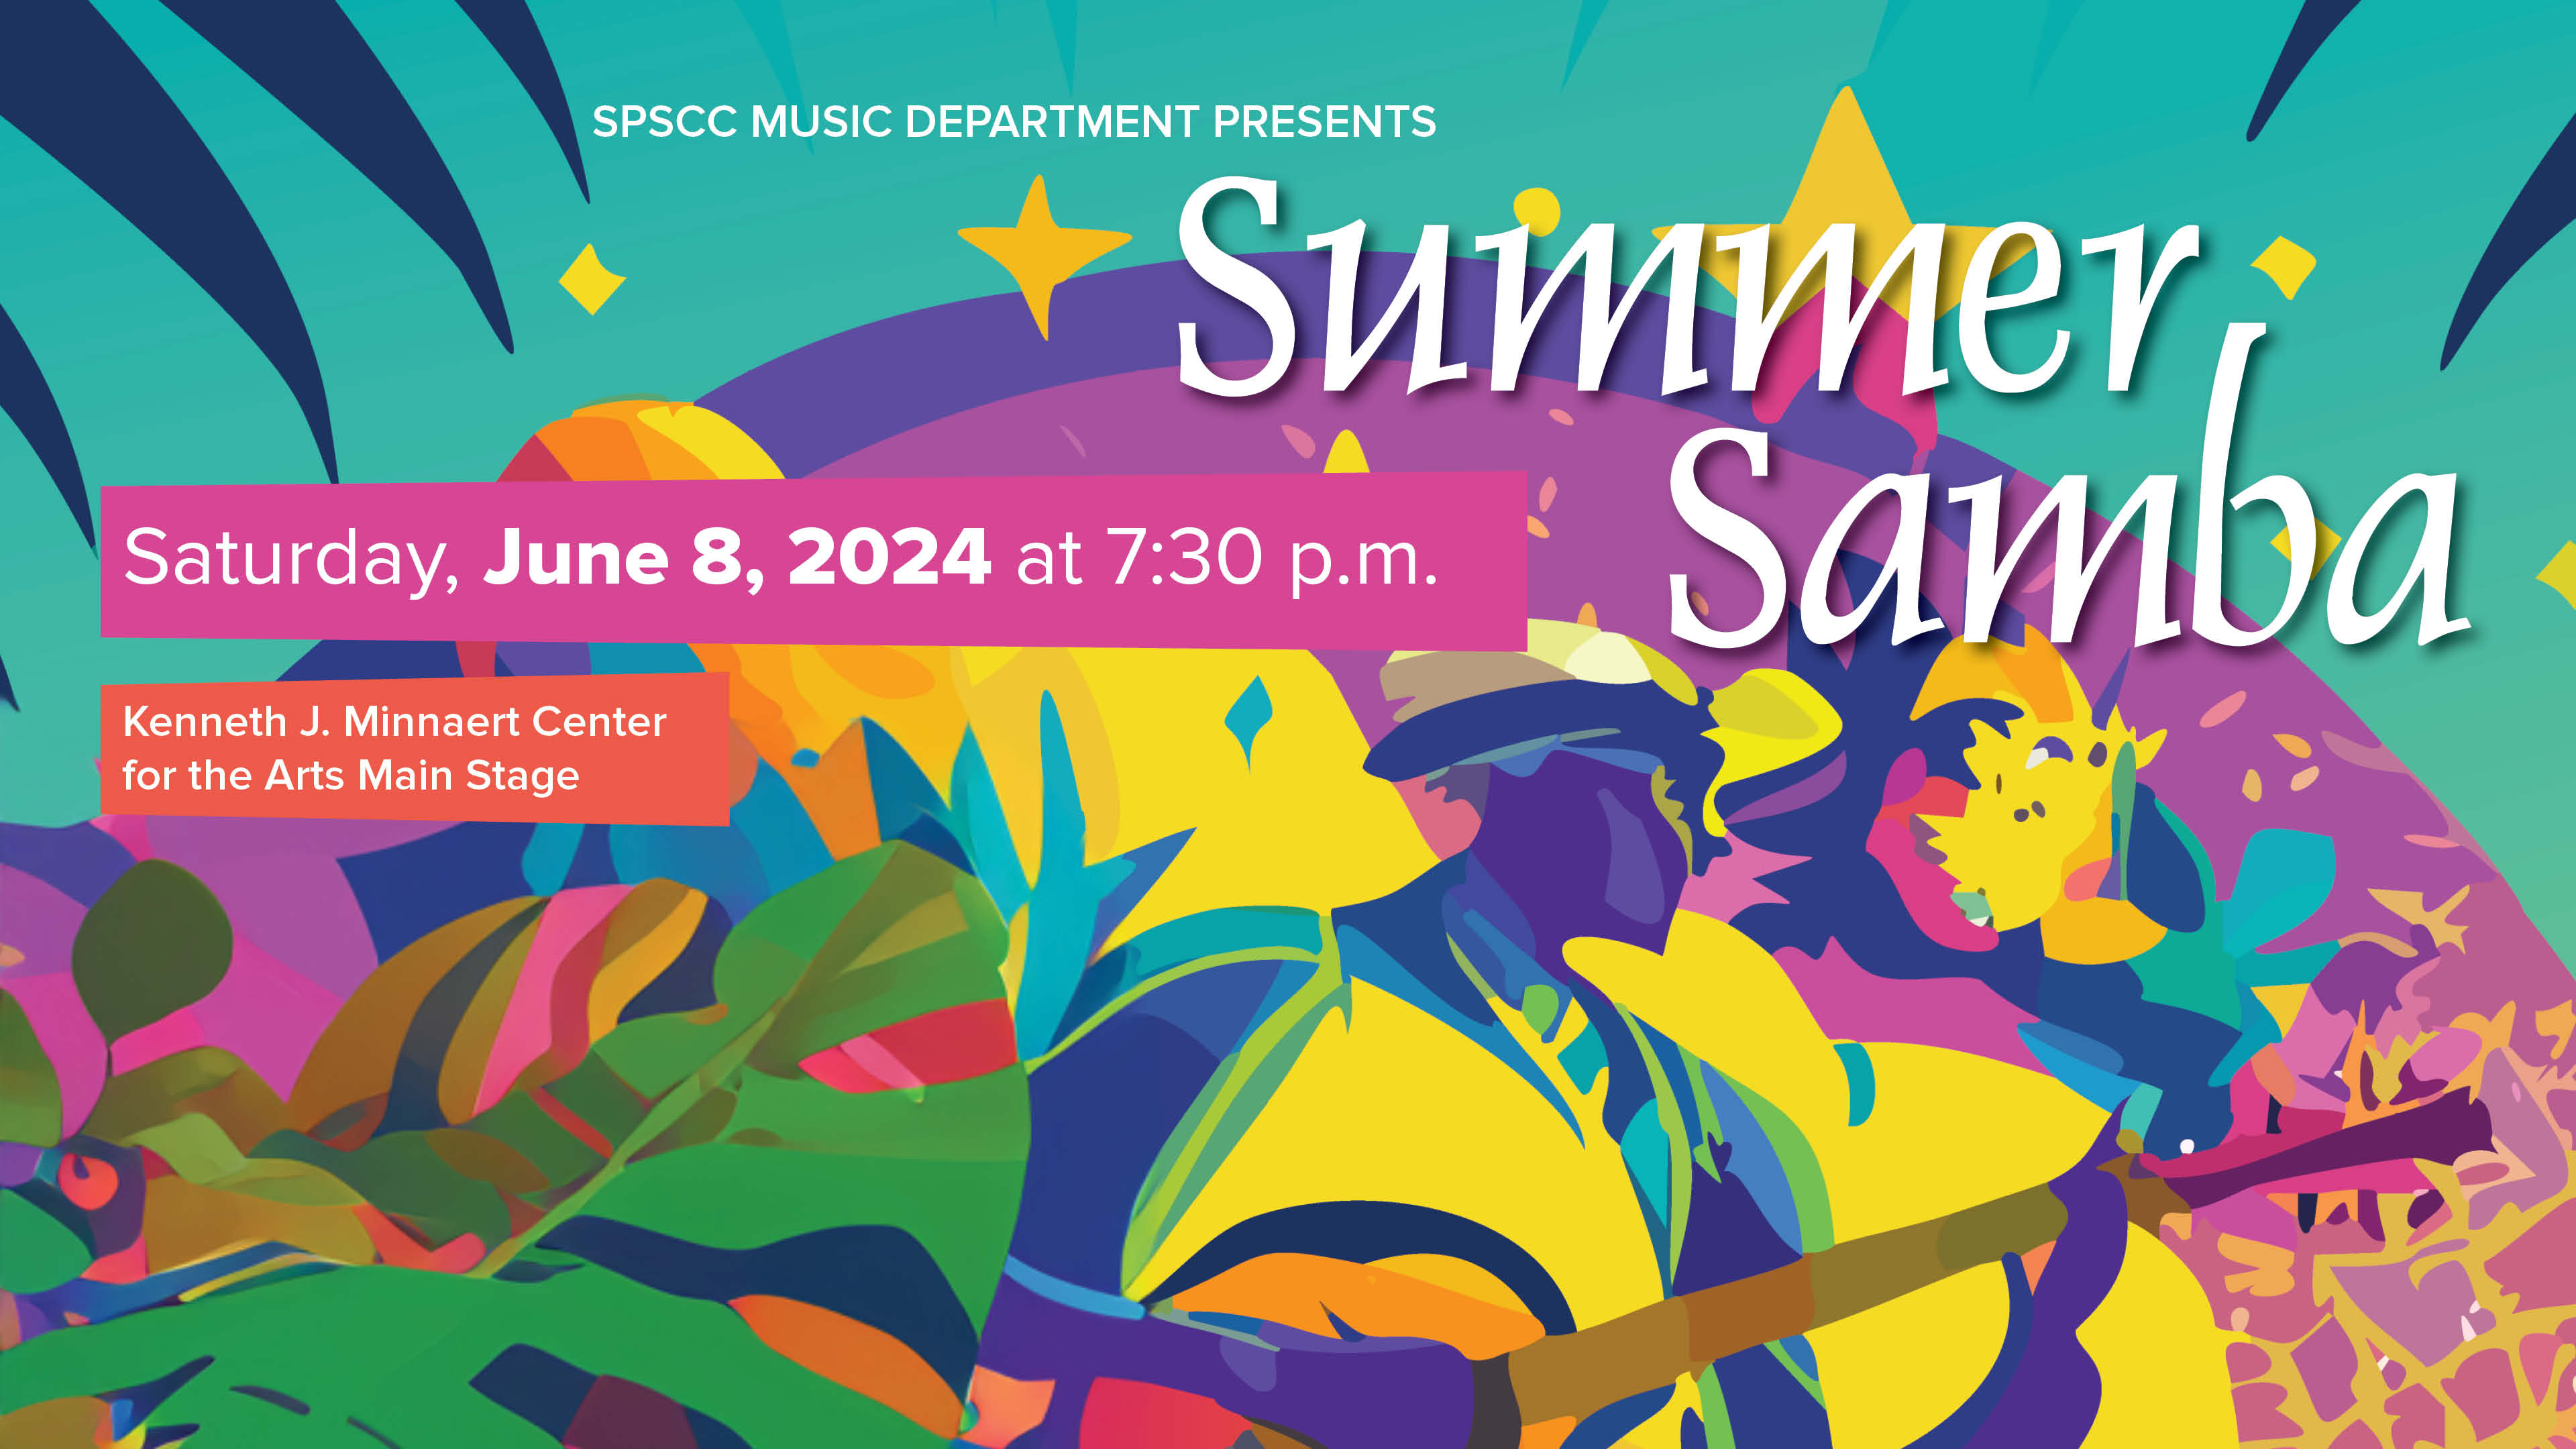 SPSCC Music Department Presents: Summer Samba on Saturday, June 8, 2024 at 7:30 p.m. at the Kenneth J. Minnaert Center for the Arts Main Stage